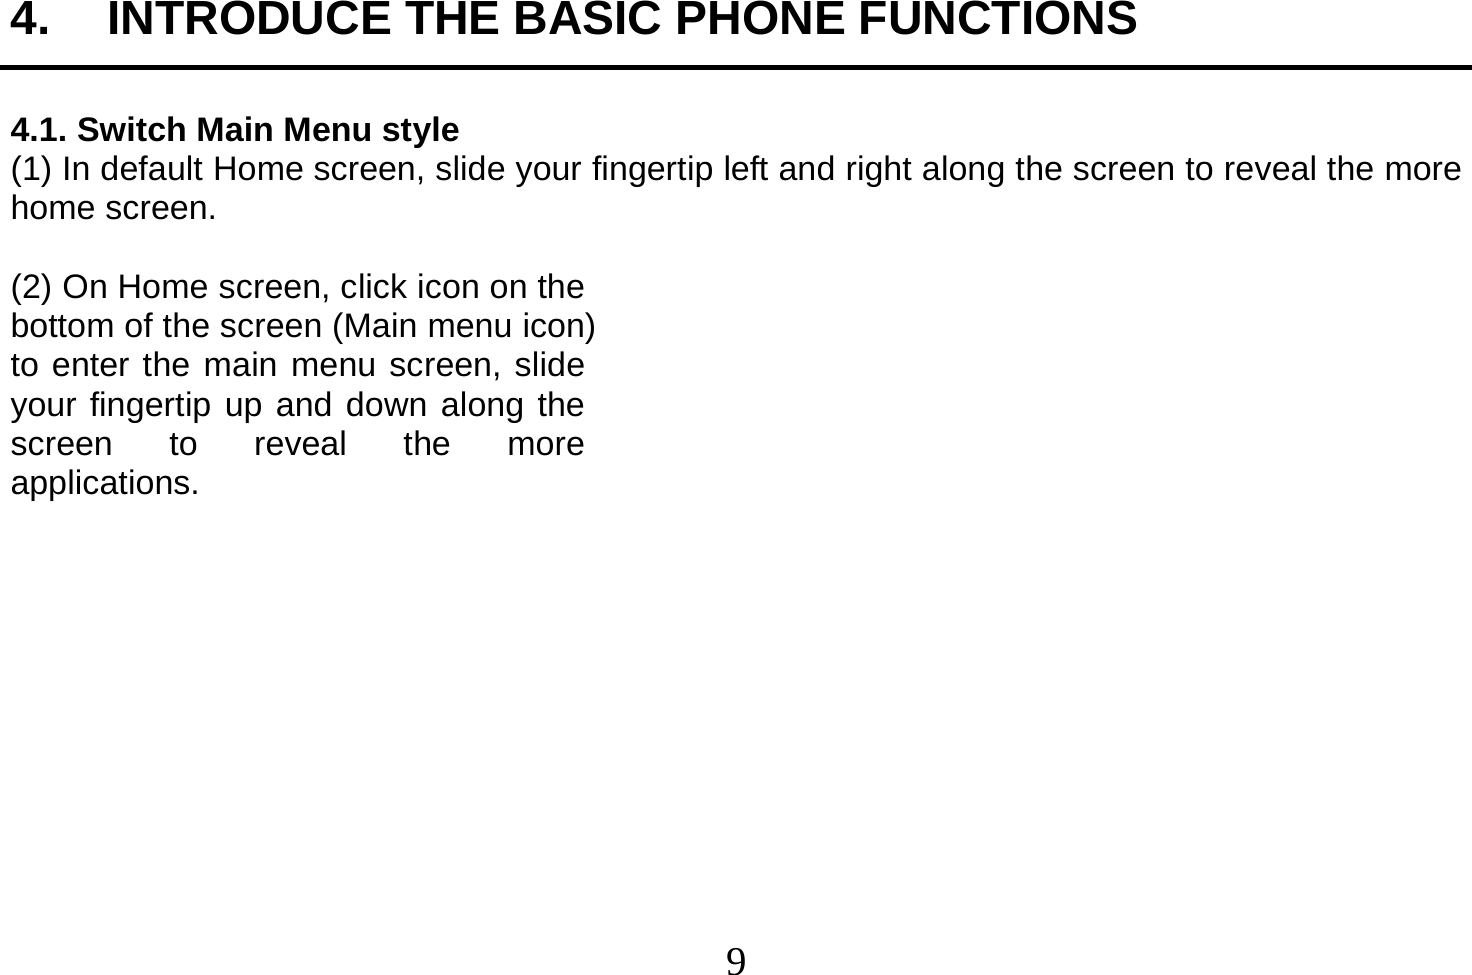  9  4.  INTRODUCE THE BASIC PHONE FUNCTIONS  4.1. Switch Main Menu style (1) In default Home screen, slide your fingertip left and right along the screen to reveal the more home screen.    (2) On Home screen, click icon on the bottom of the screen (Main menu icon) to enter the main menu screen, slide your fingertip up and down along the screen to reveal the more applications.             